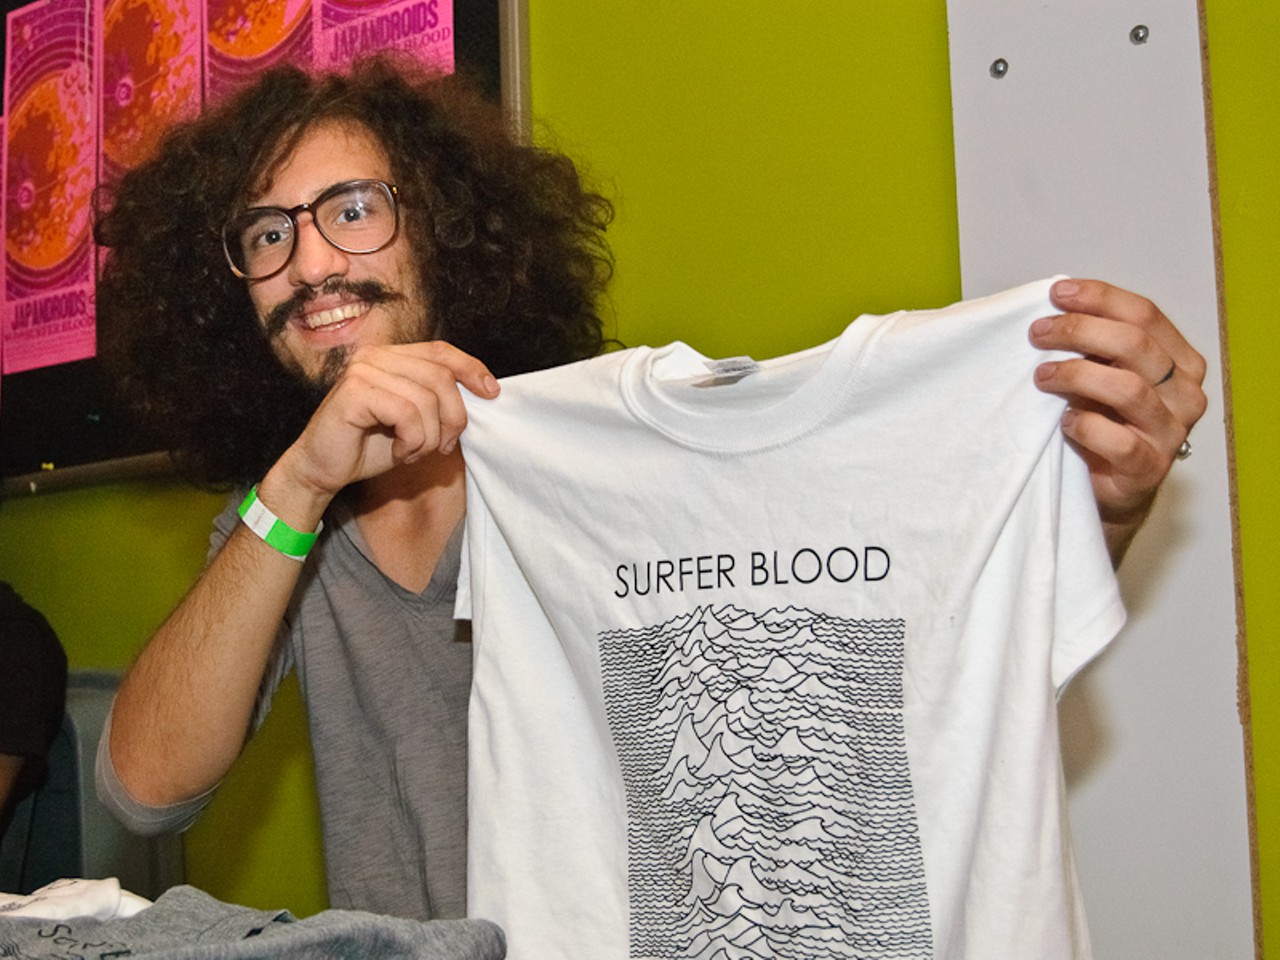 Surfer Blood member Marcos Marchesani shows off some of his band&rsquo;s merch.